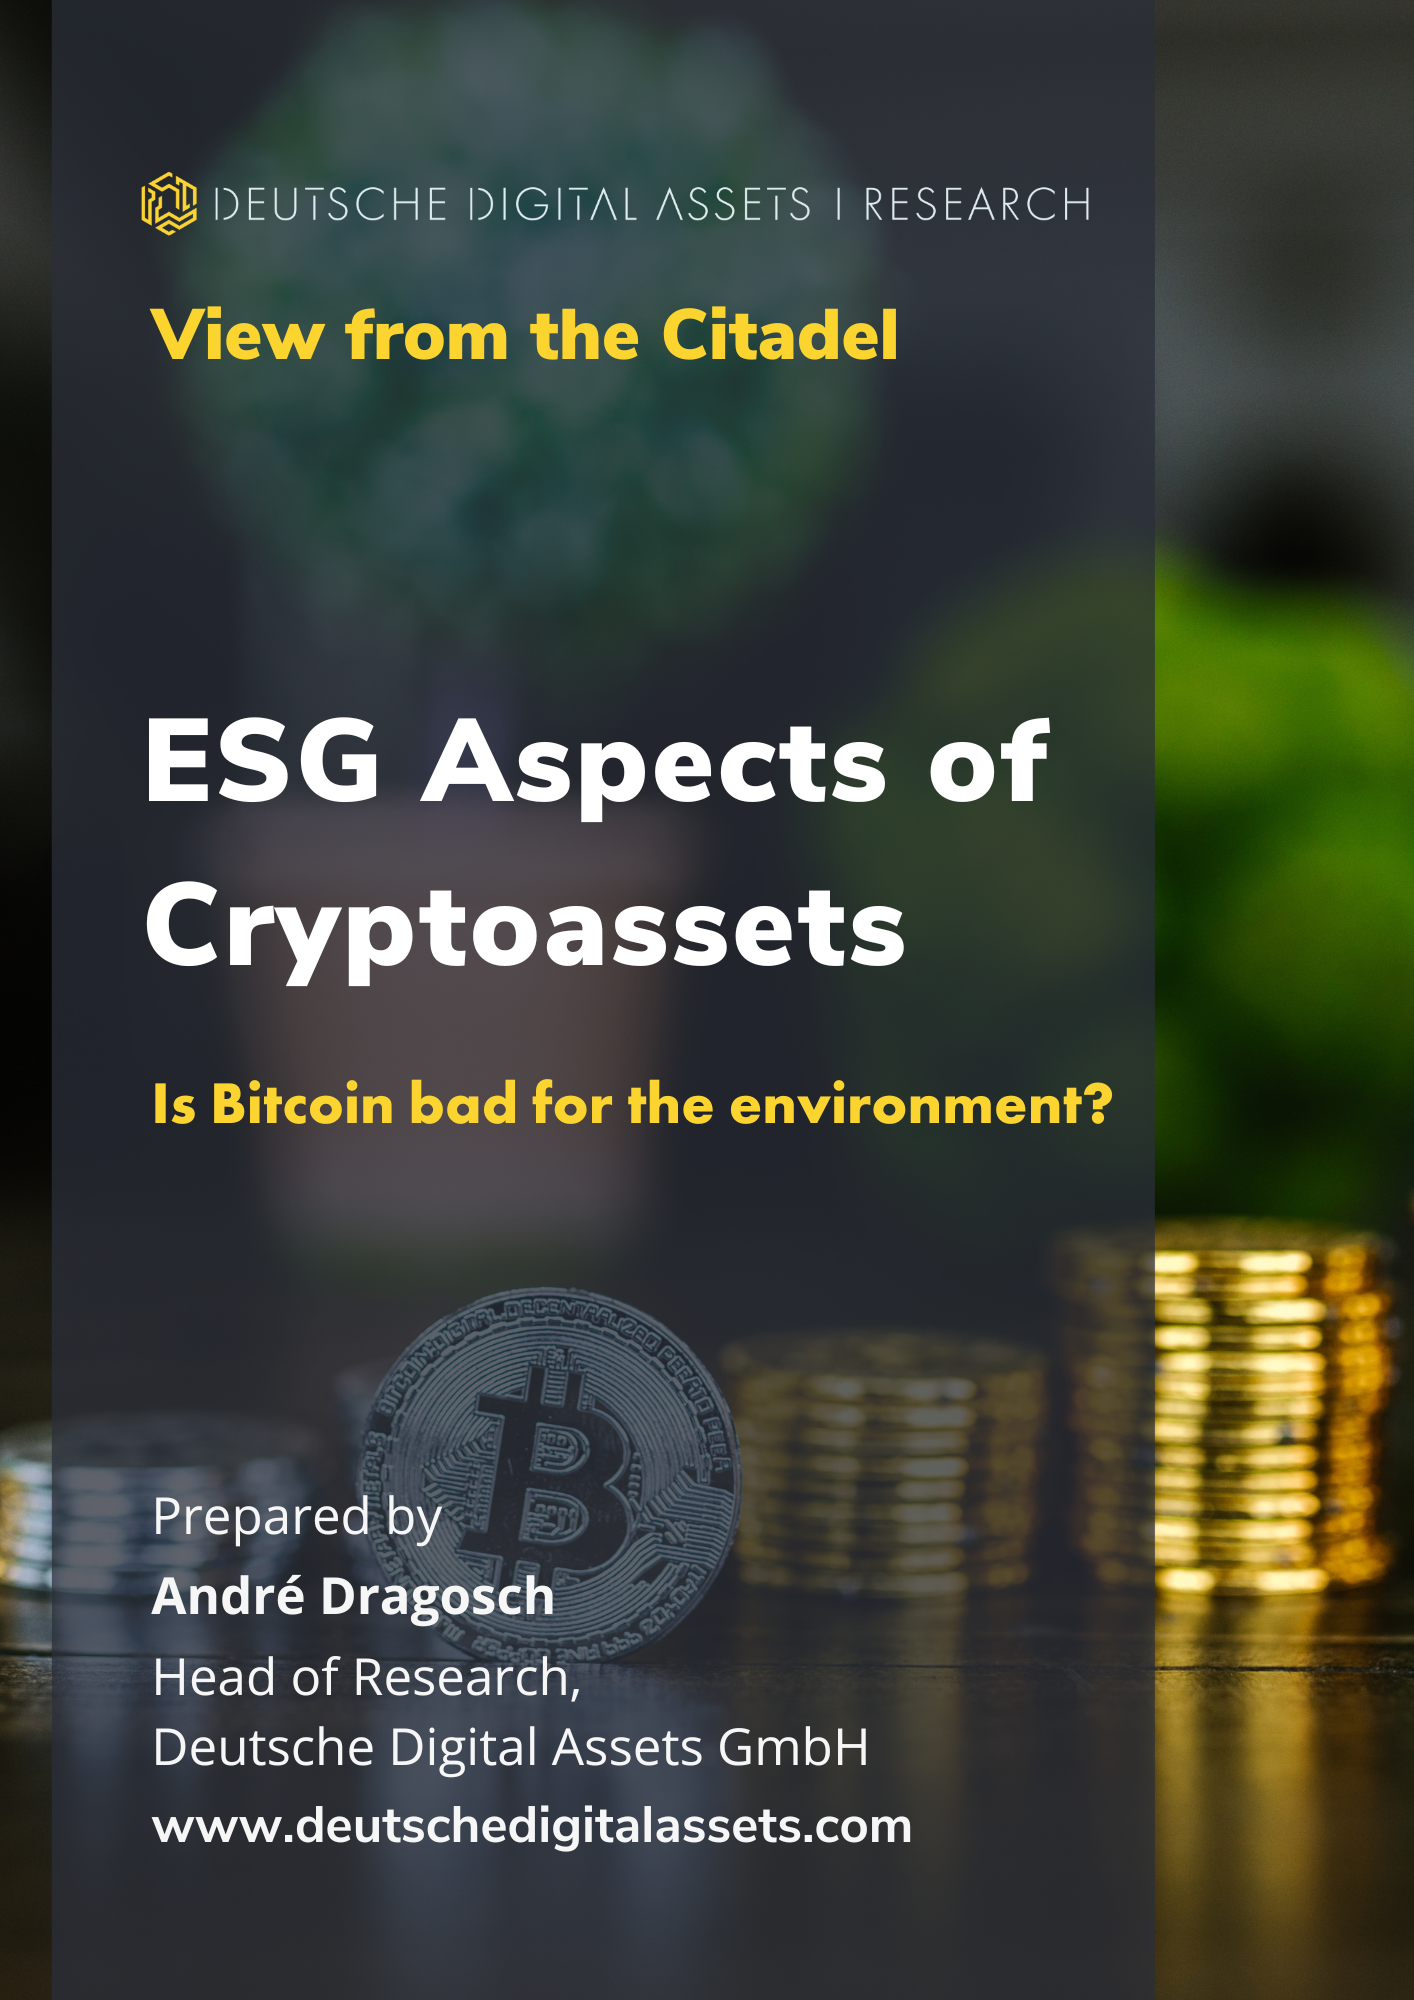 ESG Aspects of Cryptoassets, Bitcoin and ESG, Is Bitcoin bad for the environment?